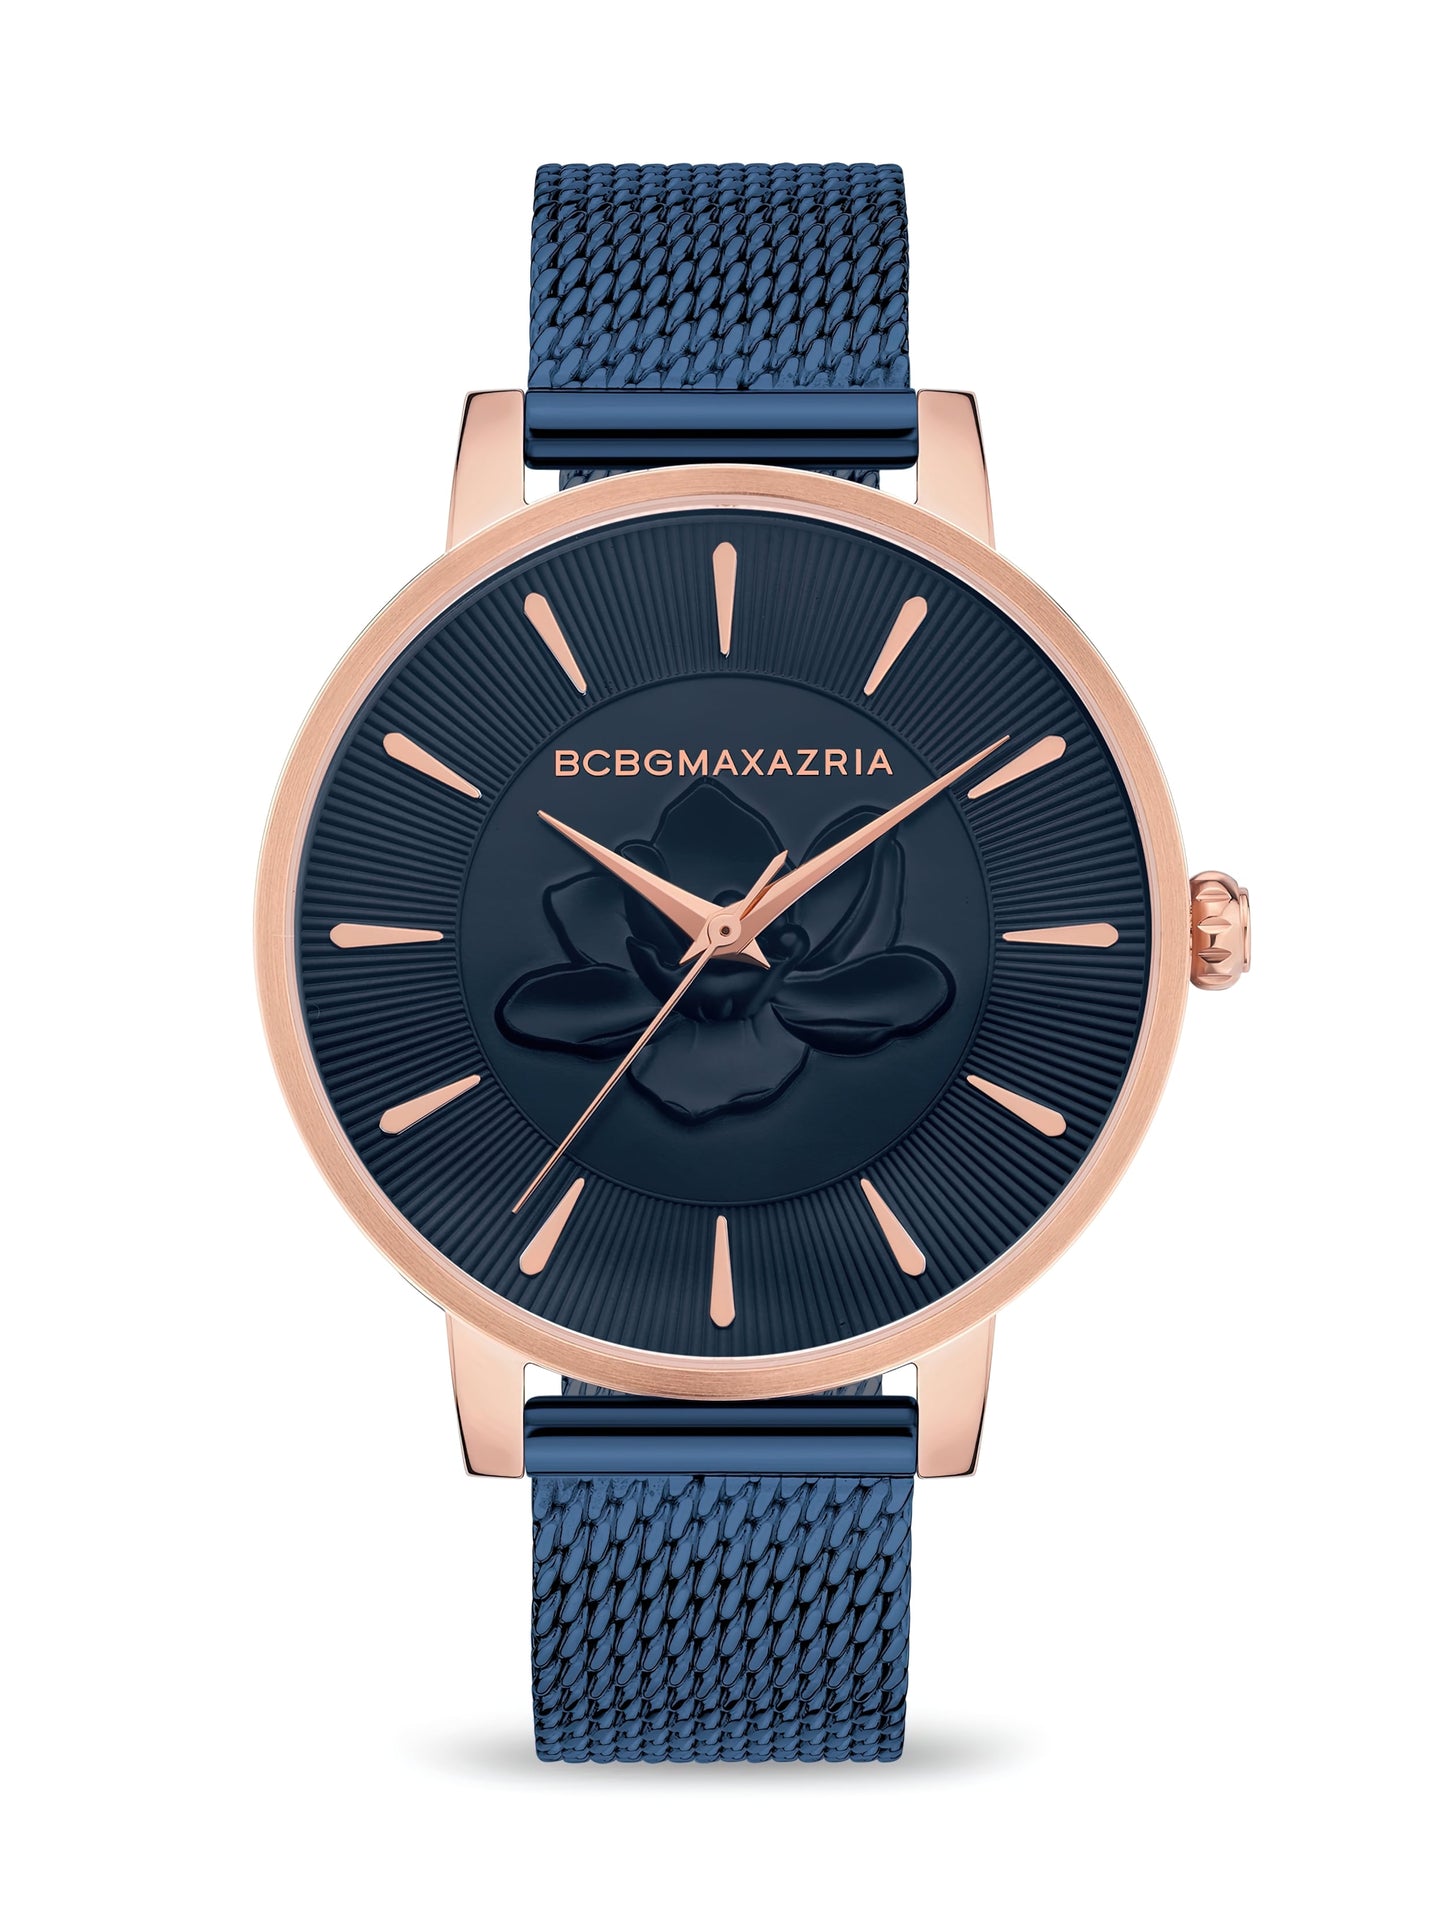 A stylish women's watch with a blue mesh strap featuring the fashionable touch of BCBGMAXAZRIA Ladies Floral Dial Blue Watch BAWLG2133105.